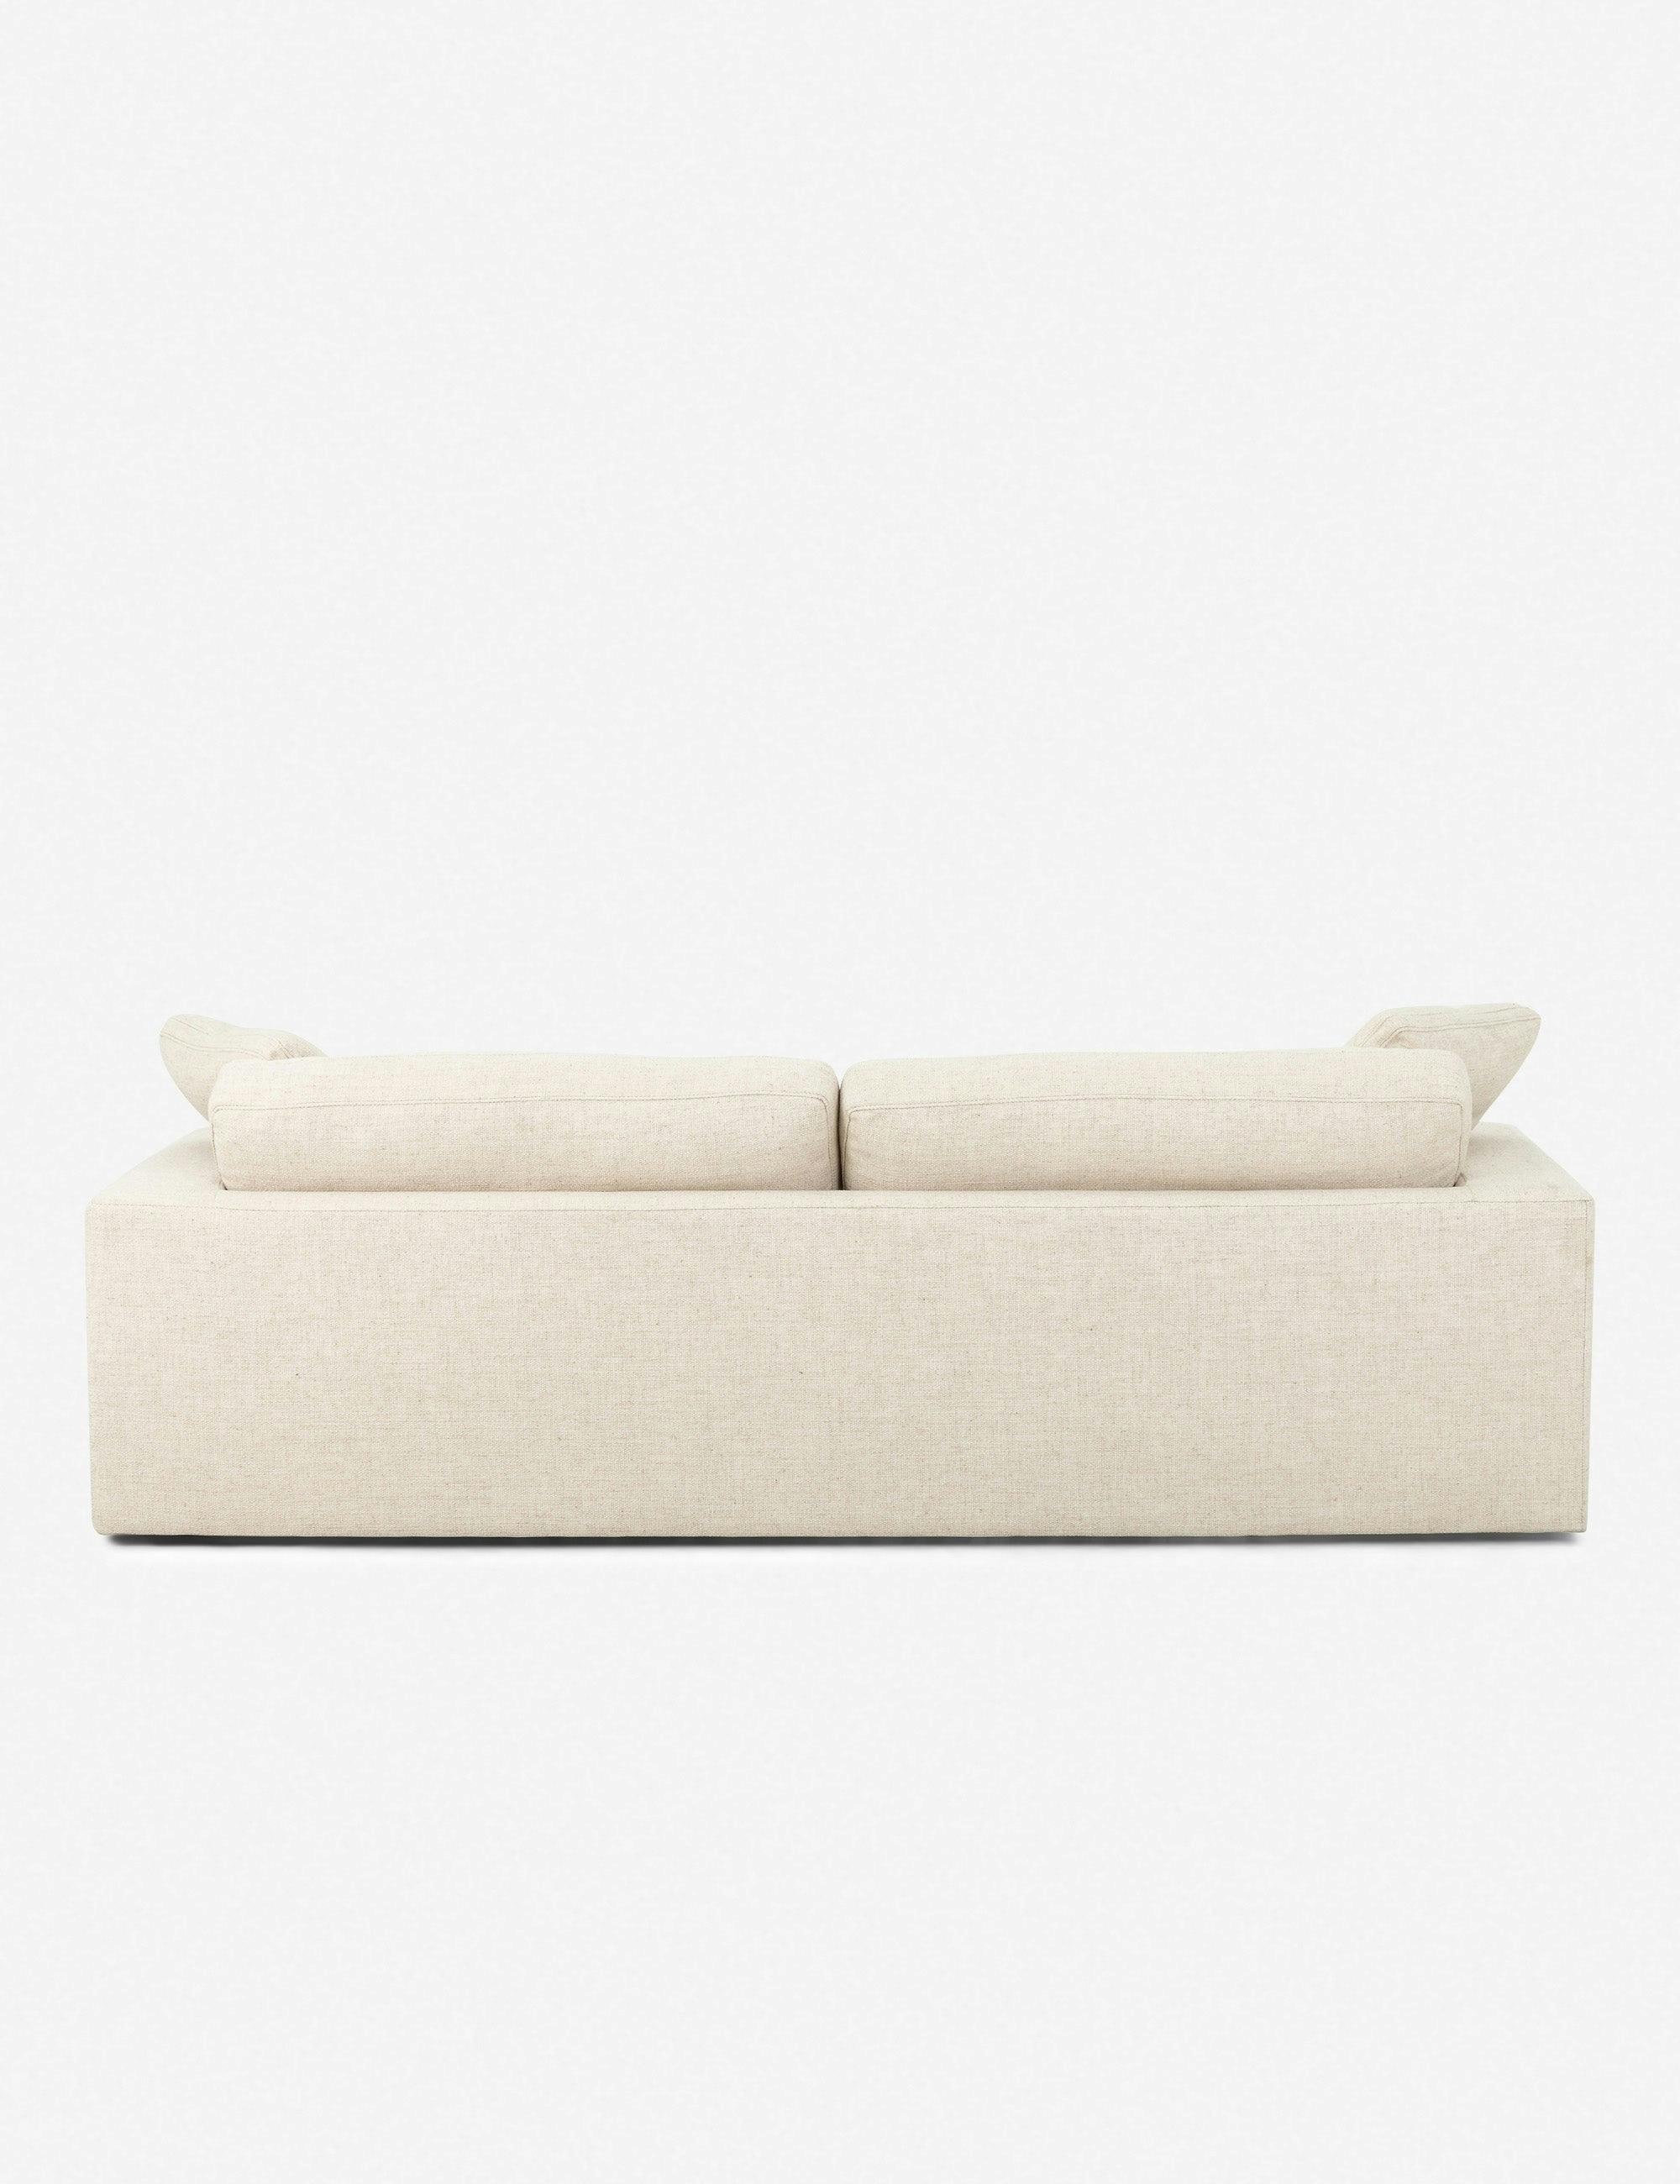 Thames Cream Casual Feather-Down Filled Plush Sofa 96.5"